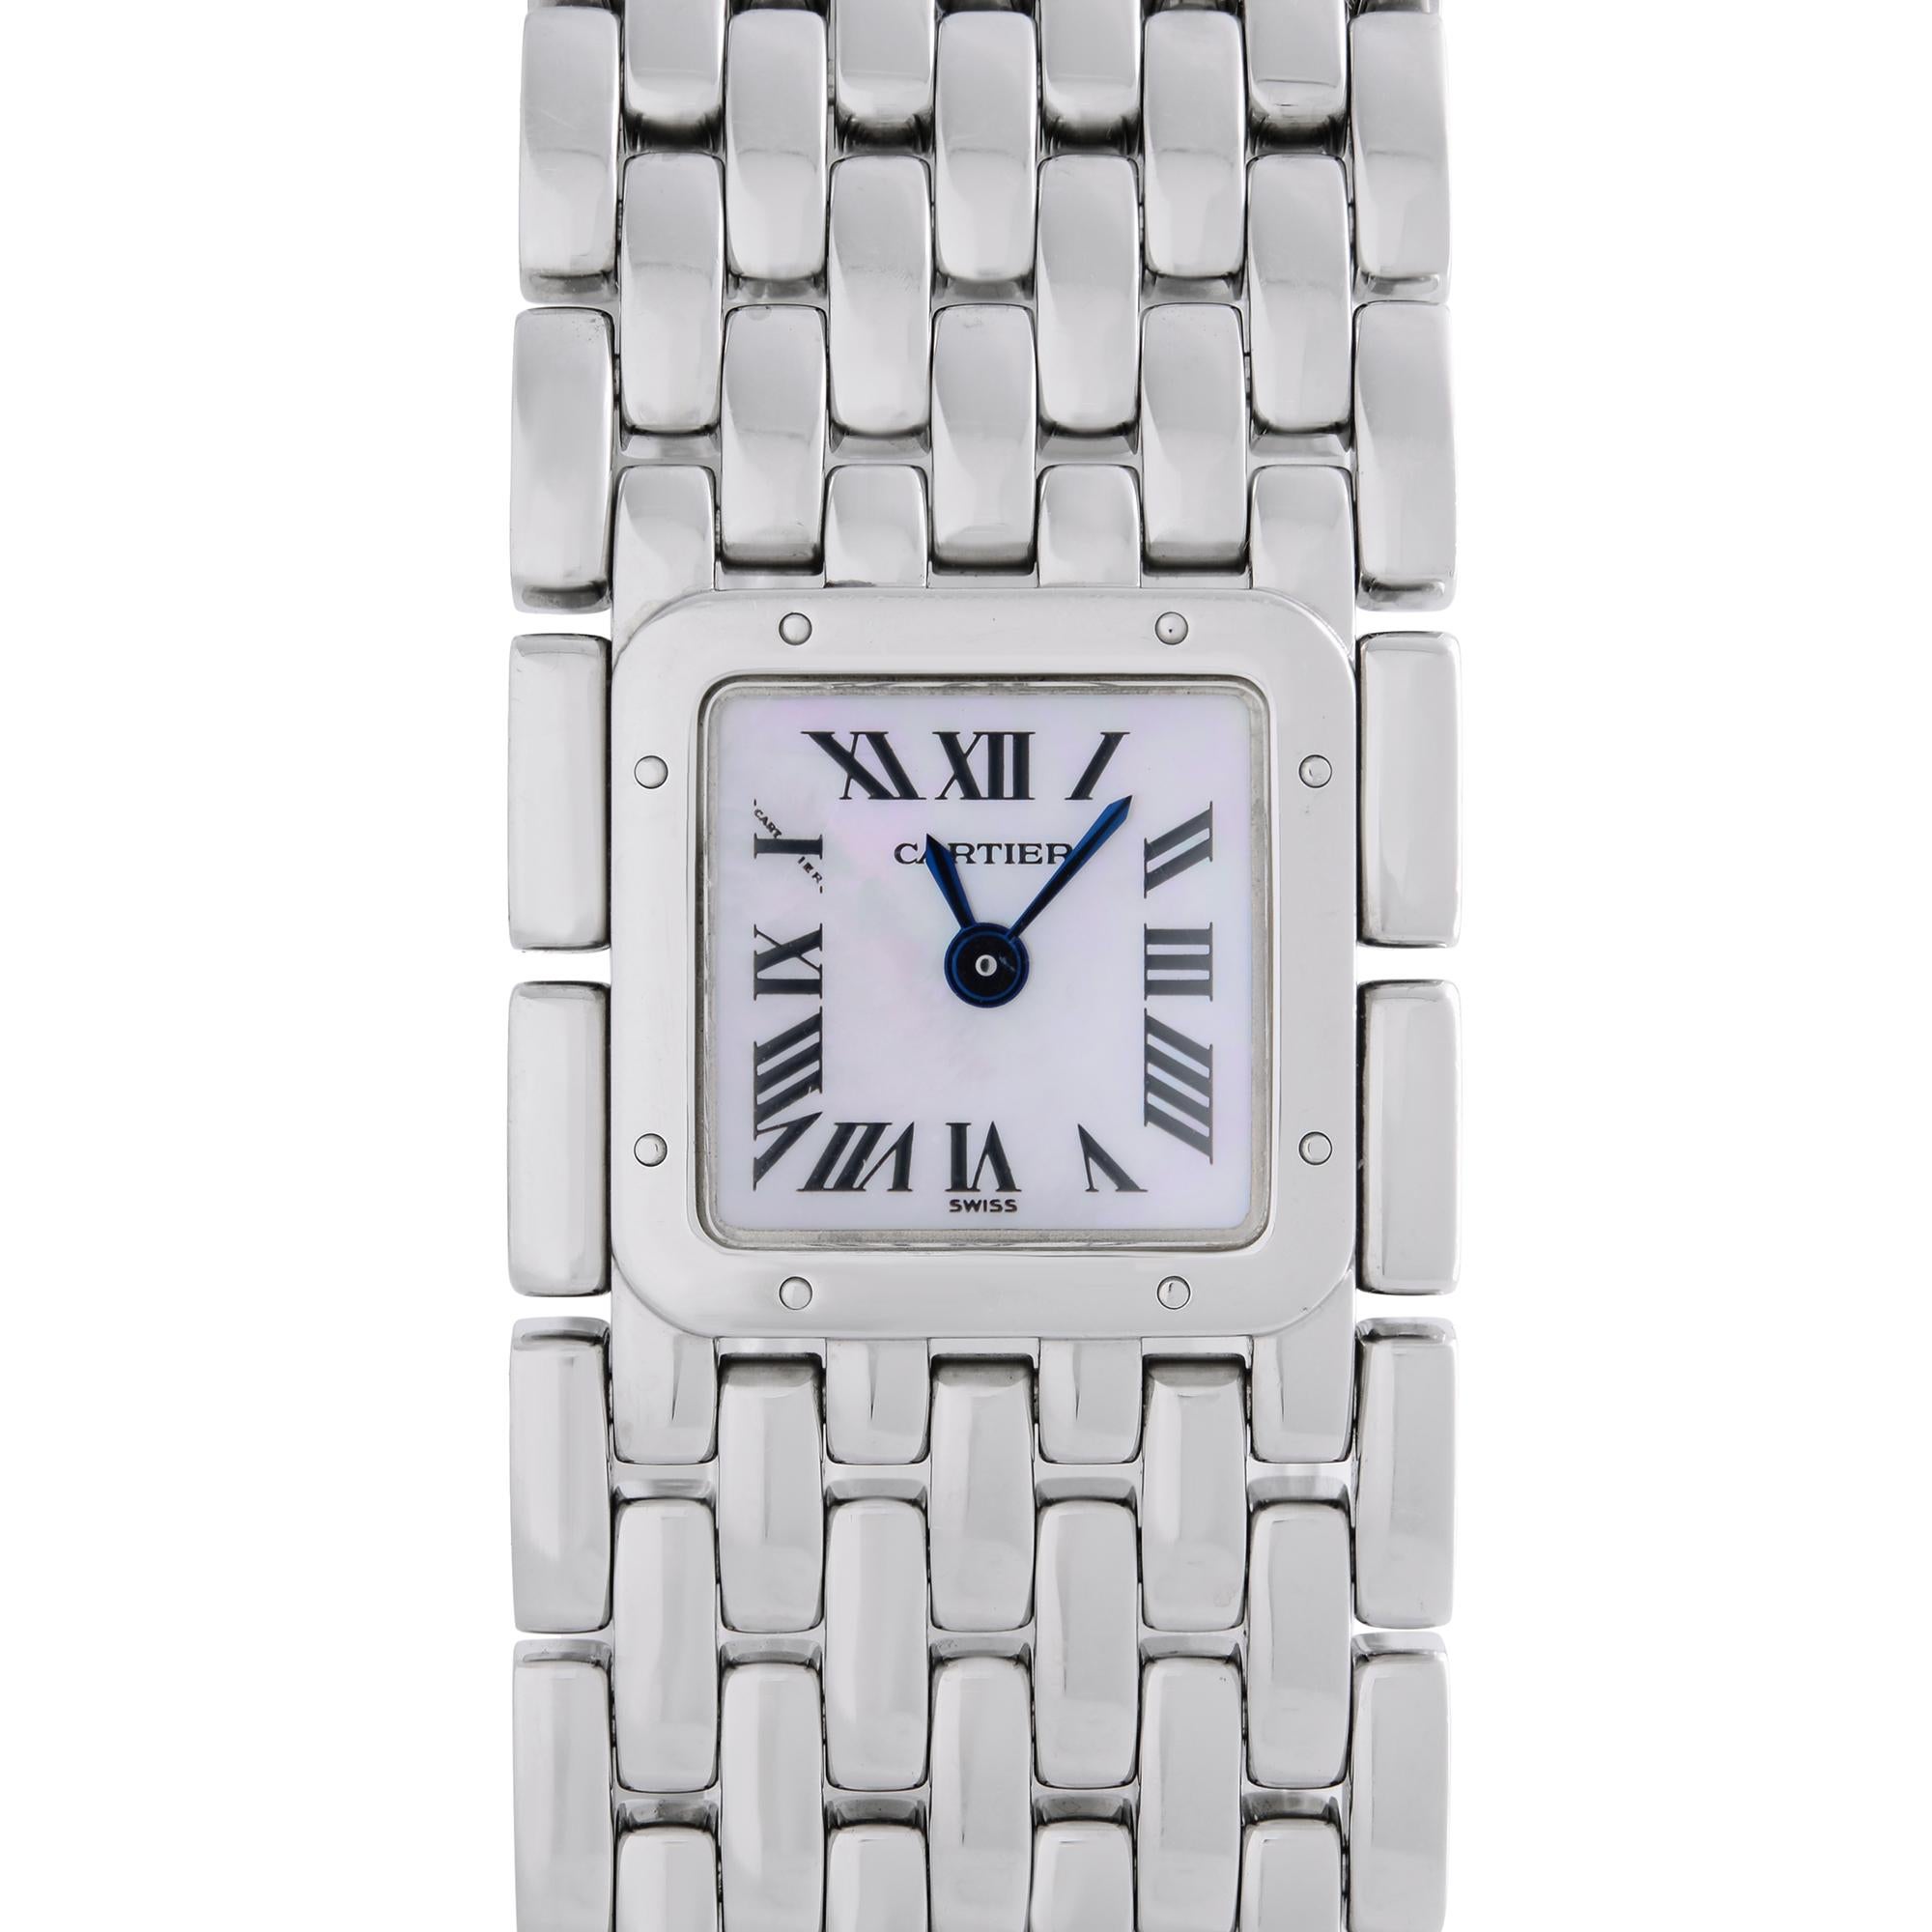 Pre-owned Cartier Panthere Ruban Stainless Steel MOP Dial Quartz Ladies Watch. B No Original Box and Papers are Included. Comes with Chronostore Presentation Box and Authenticity Card. Covered by 1-year Chronostore Warranty.
Details:
Brand